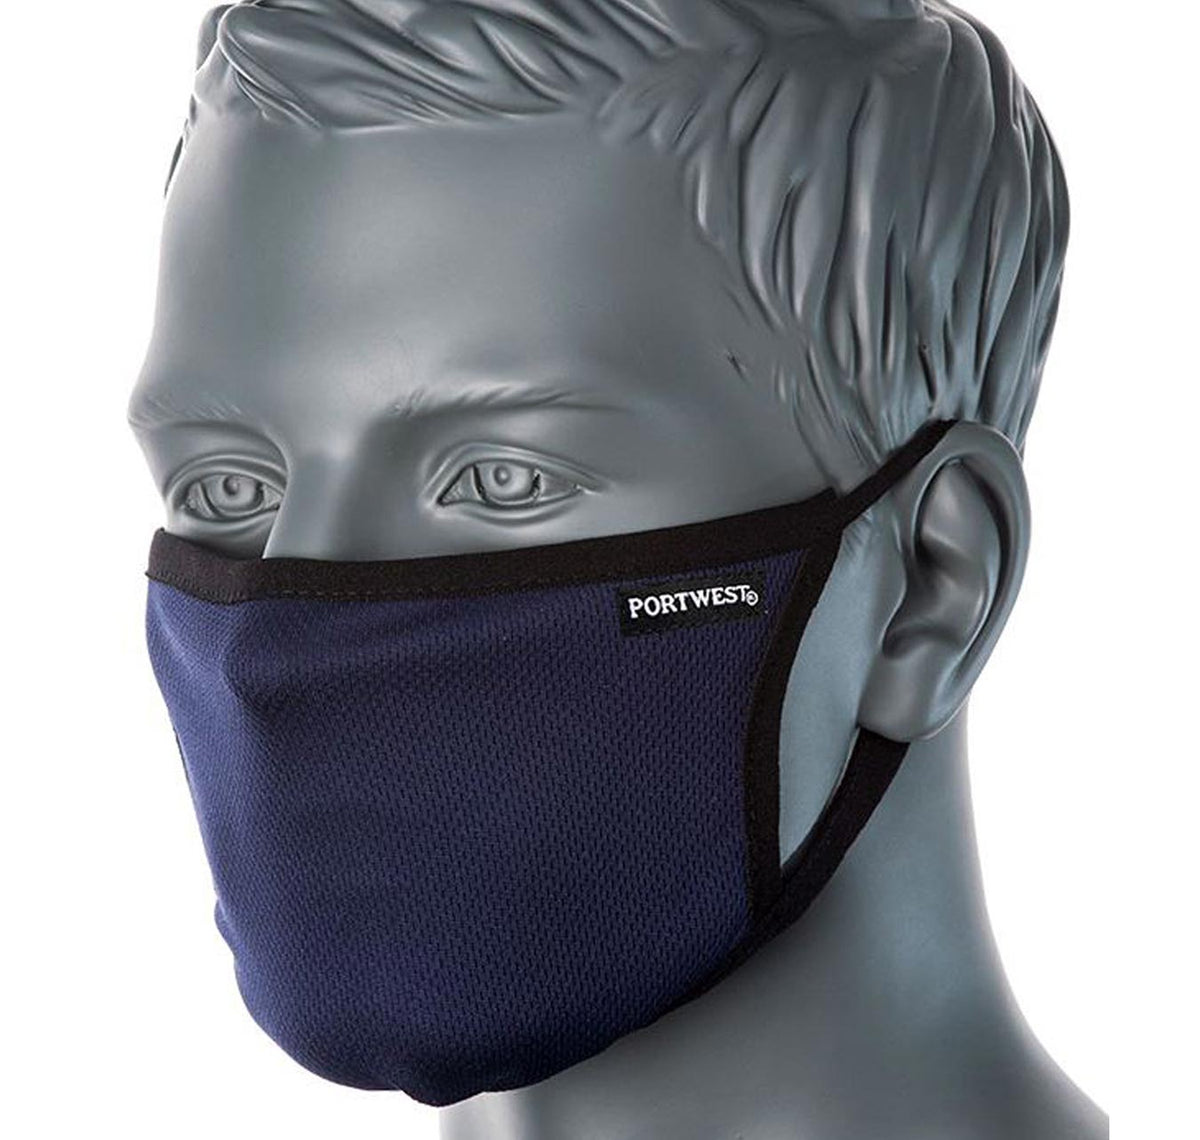 Portwest 3-Ply Anti-Microbial Adjustable Fabric Face Mask